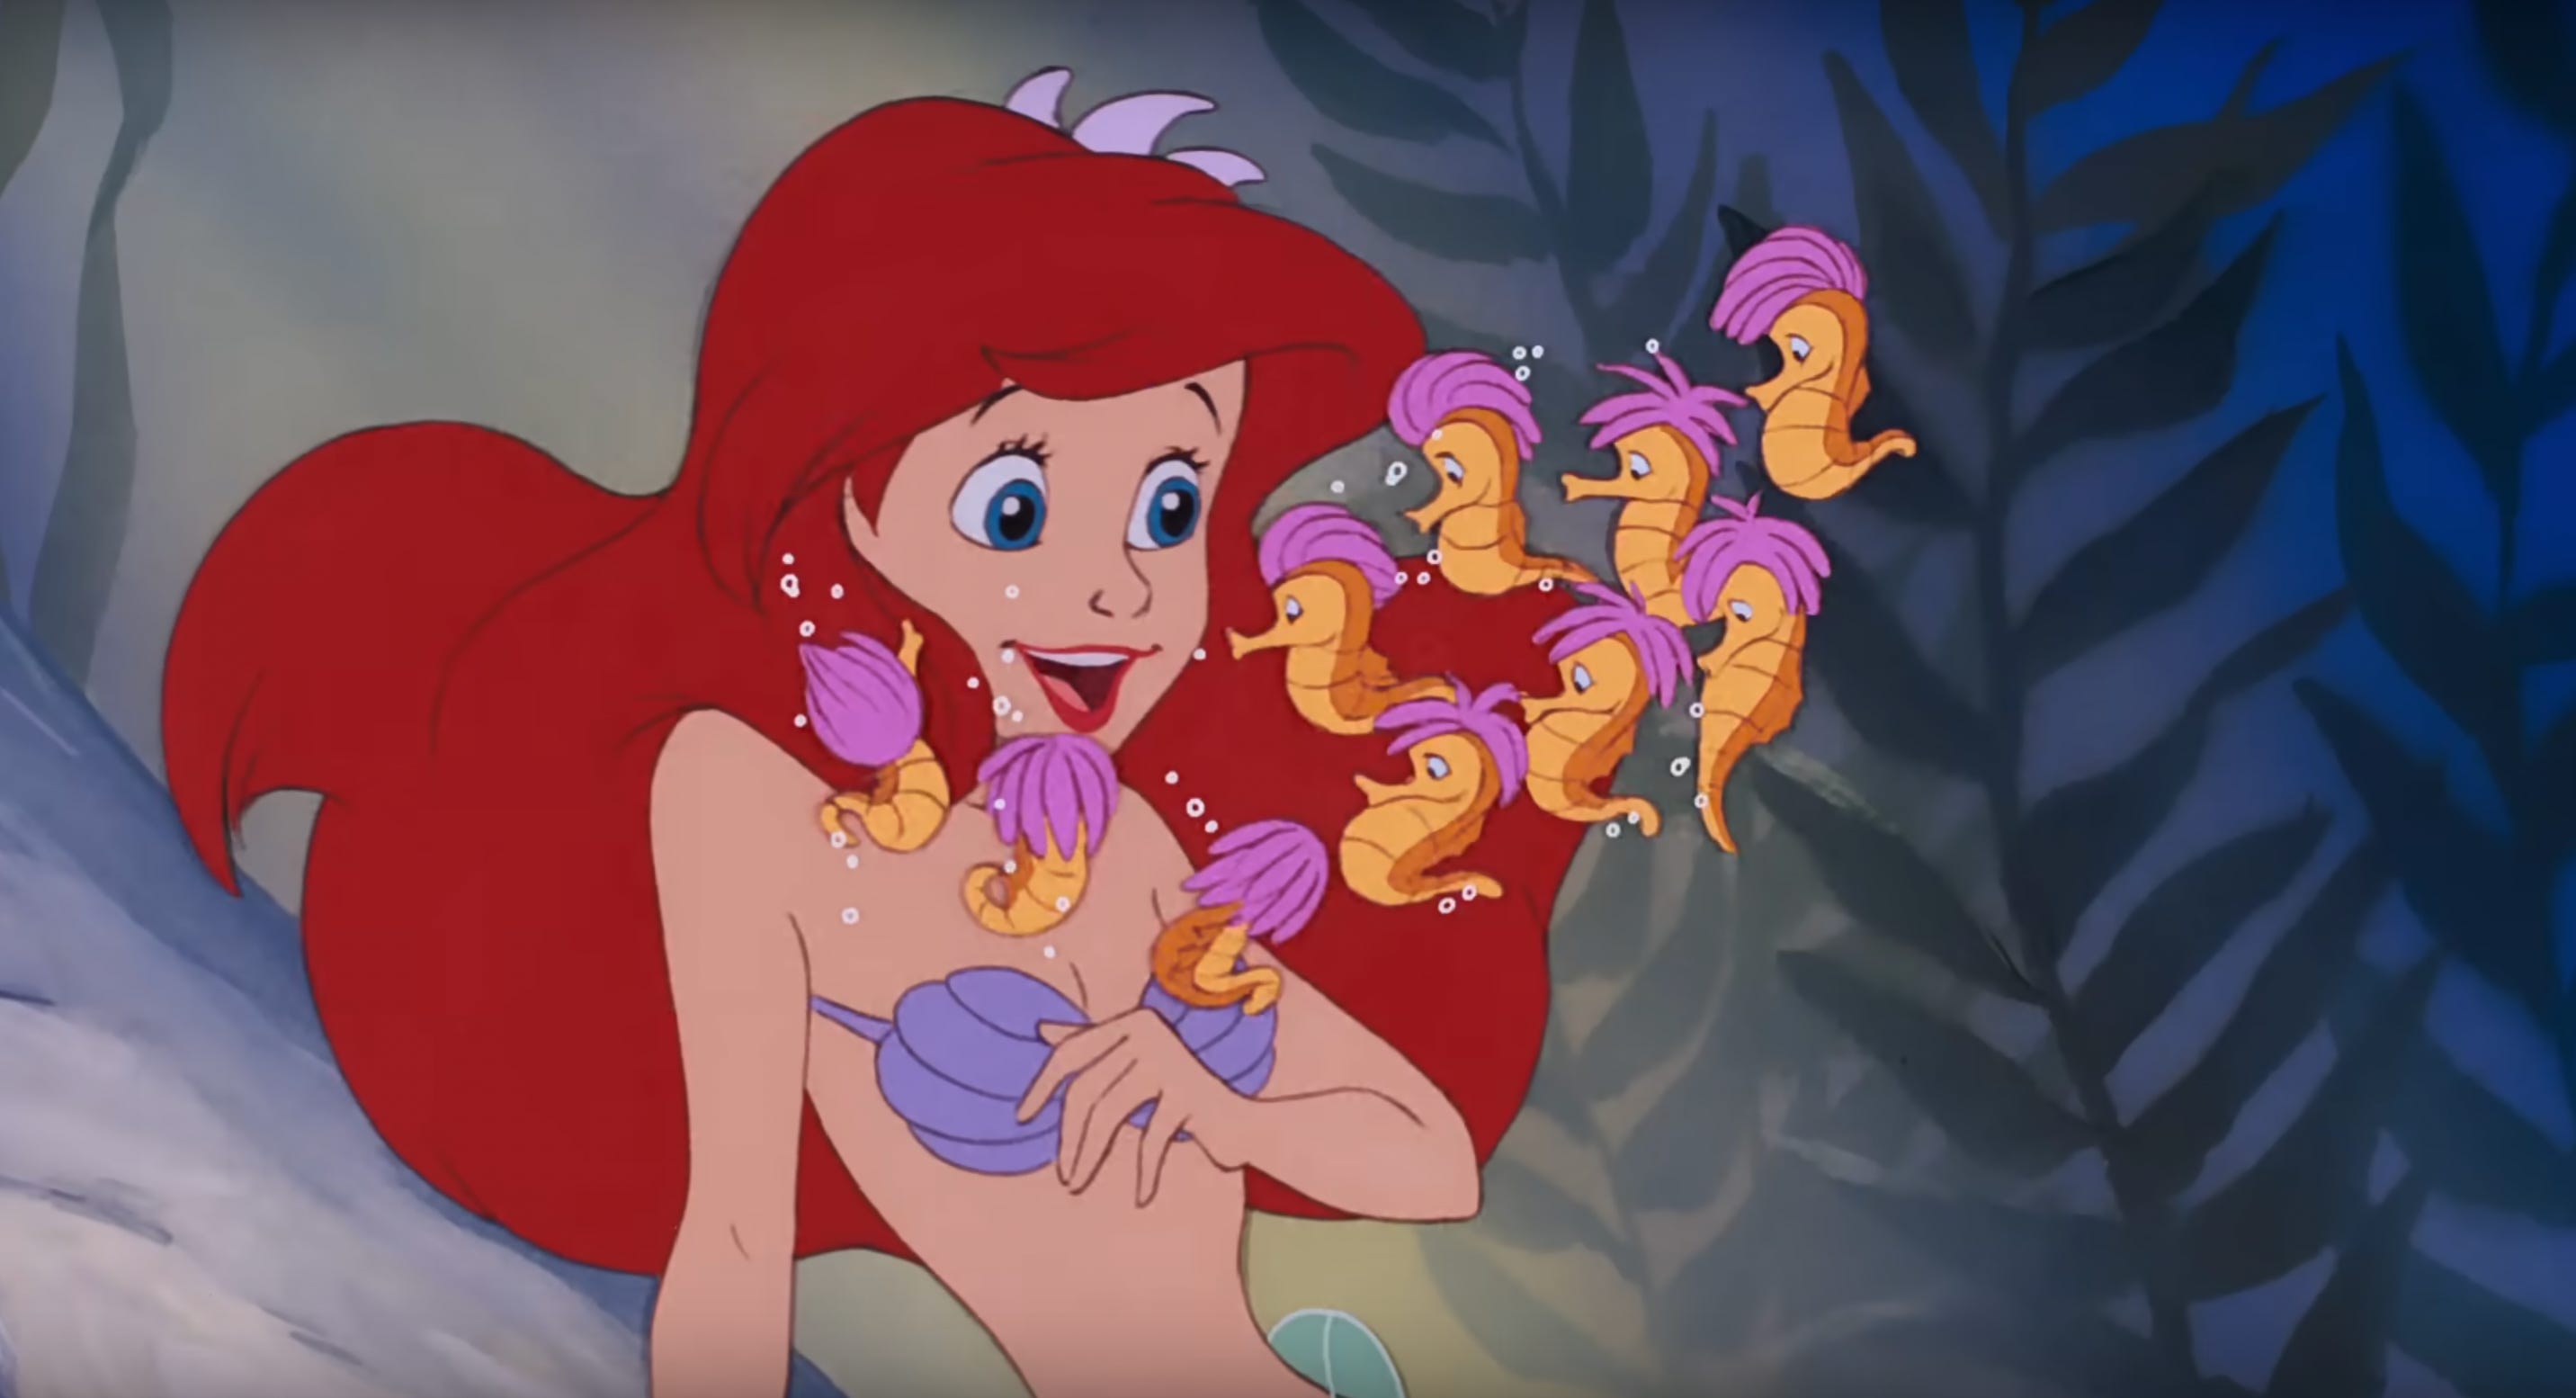 The Little Mermaid review: Halle Bailey and nostalgia can't save